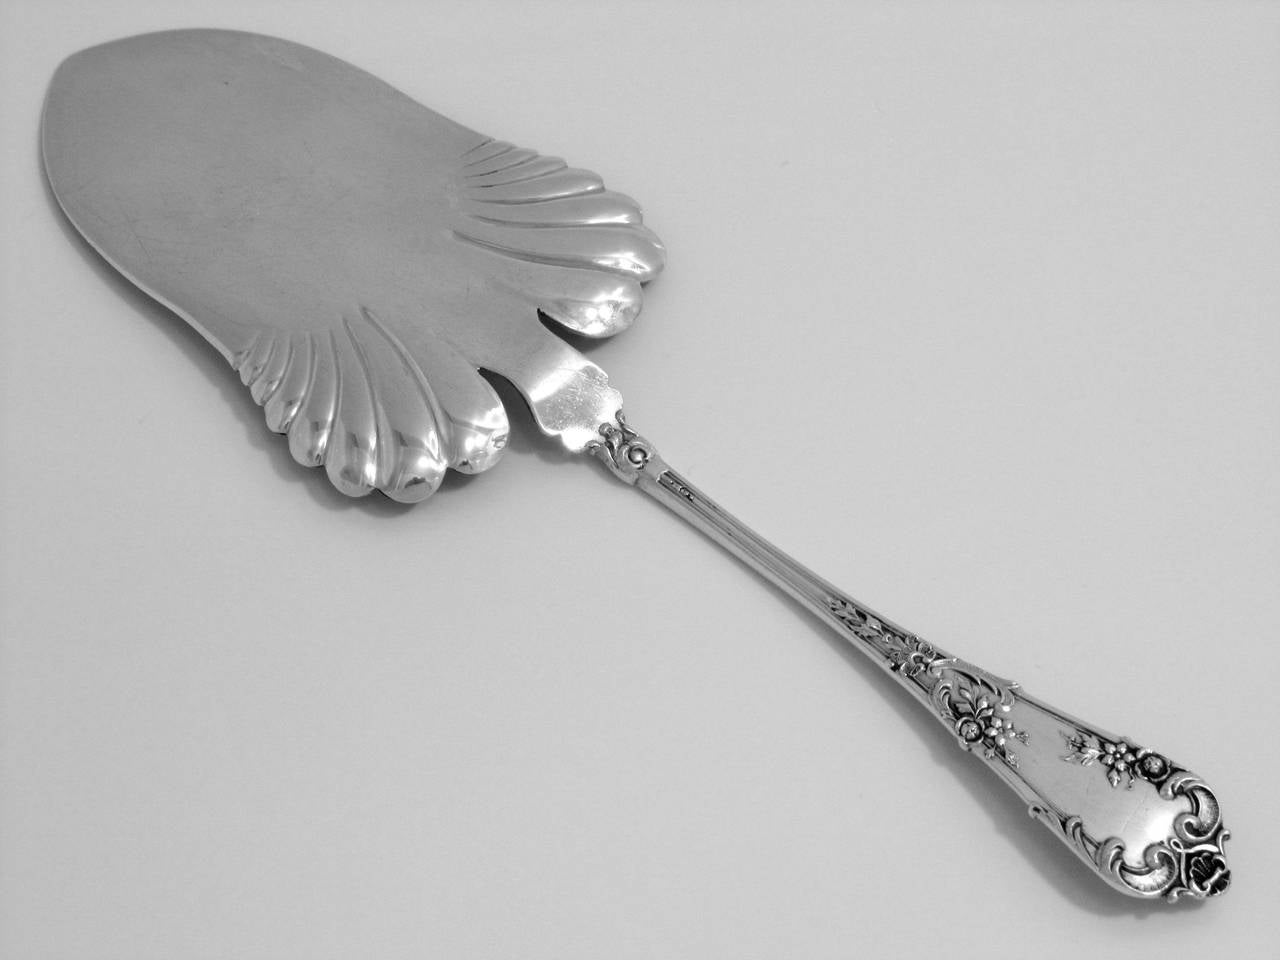 Gorgeous French All Sterling Silver Pie Pastry Fish Server Fish-Shaped blade For Sale 1